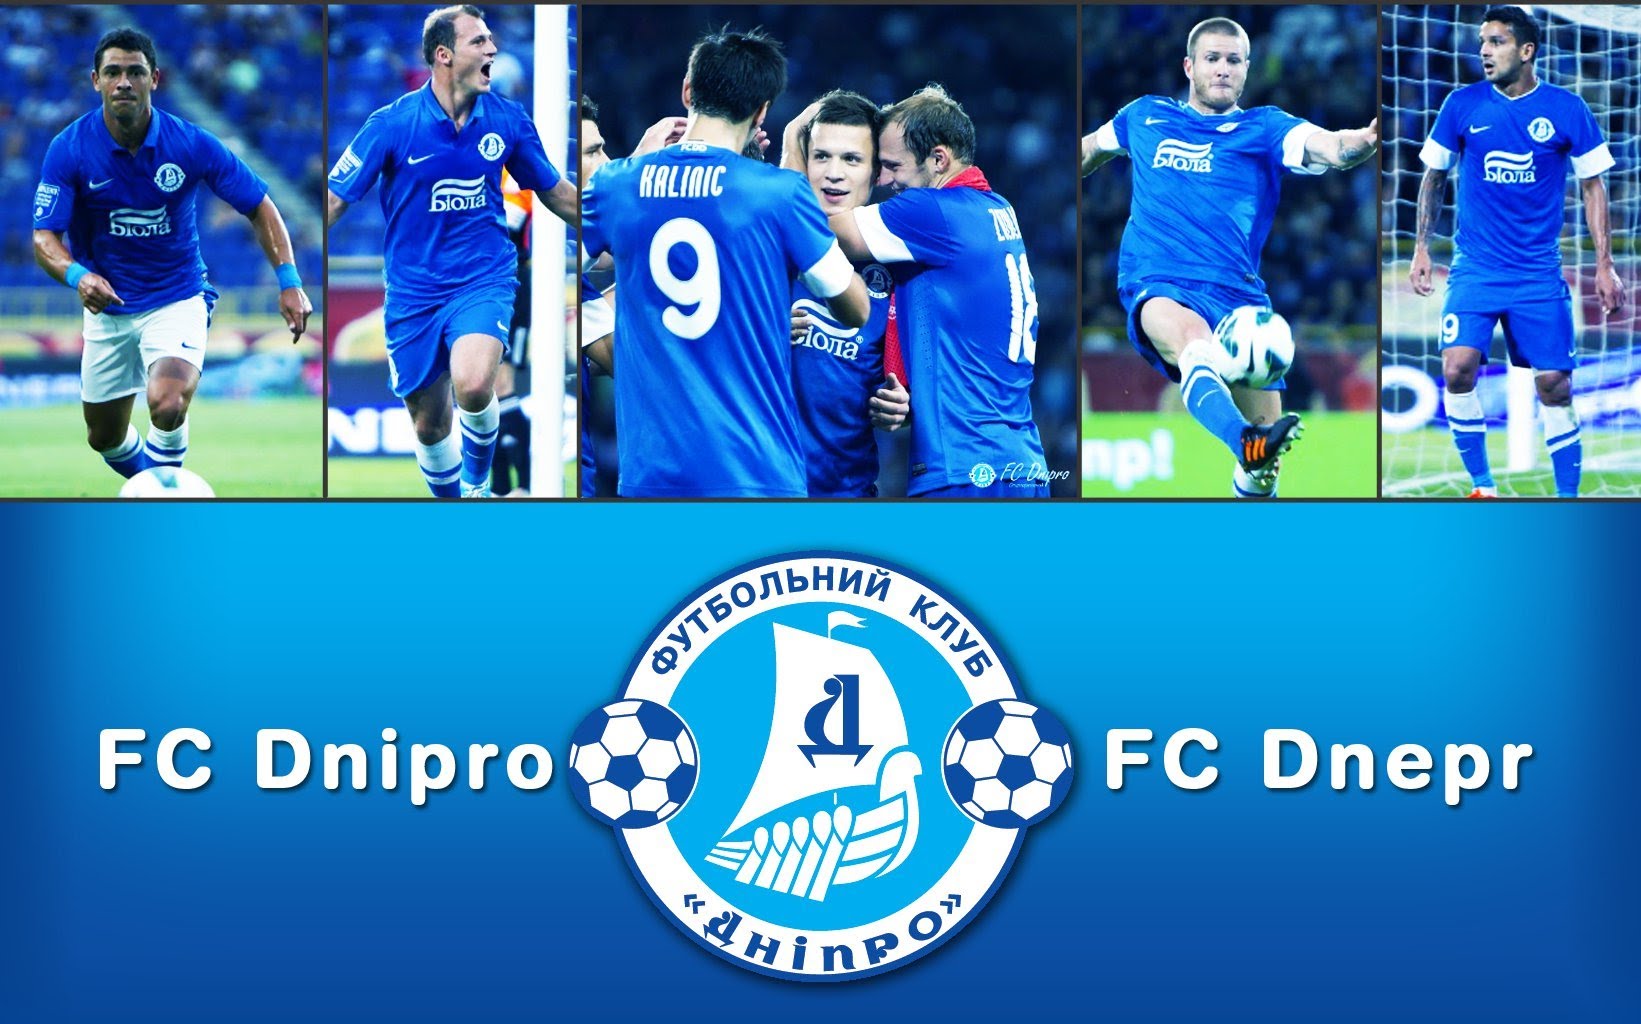 High Resolution Wallpaper | FC Dnipro Dnipropetrovsk 1641x1024 px